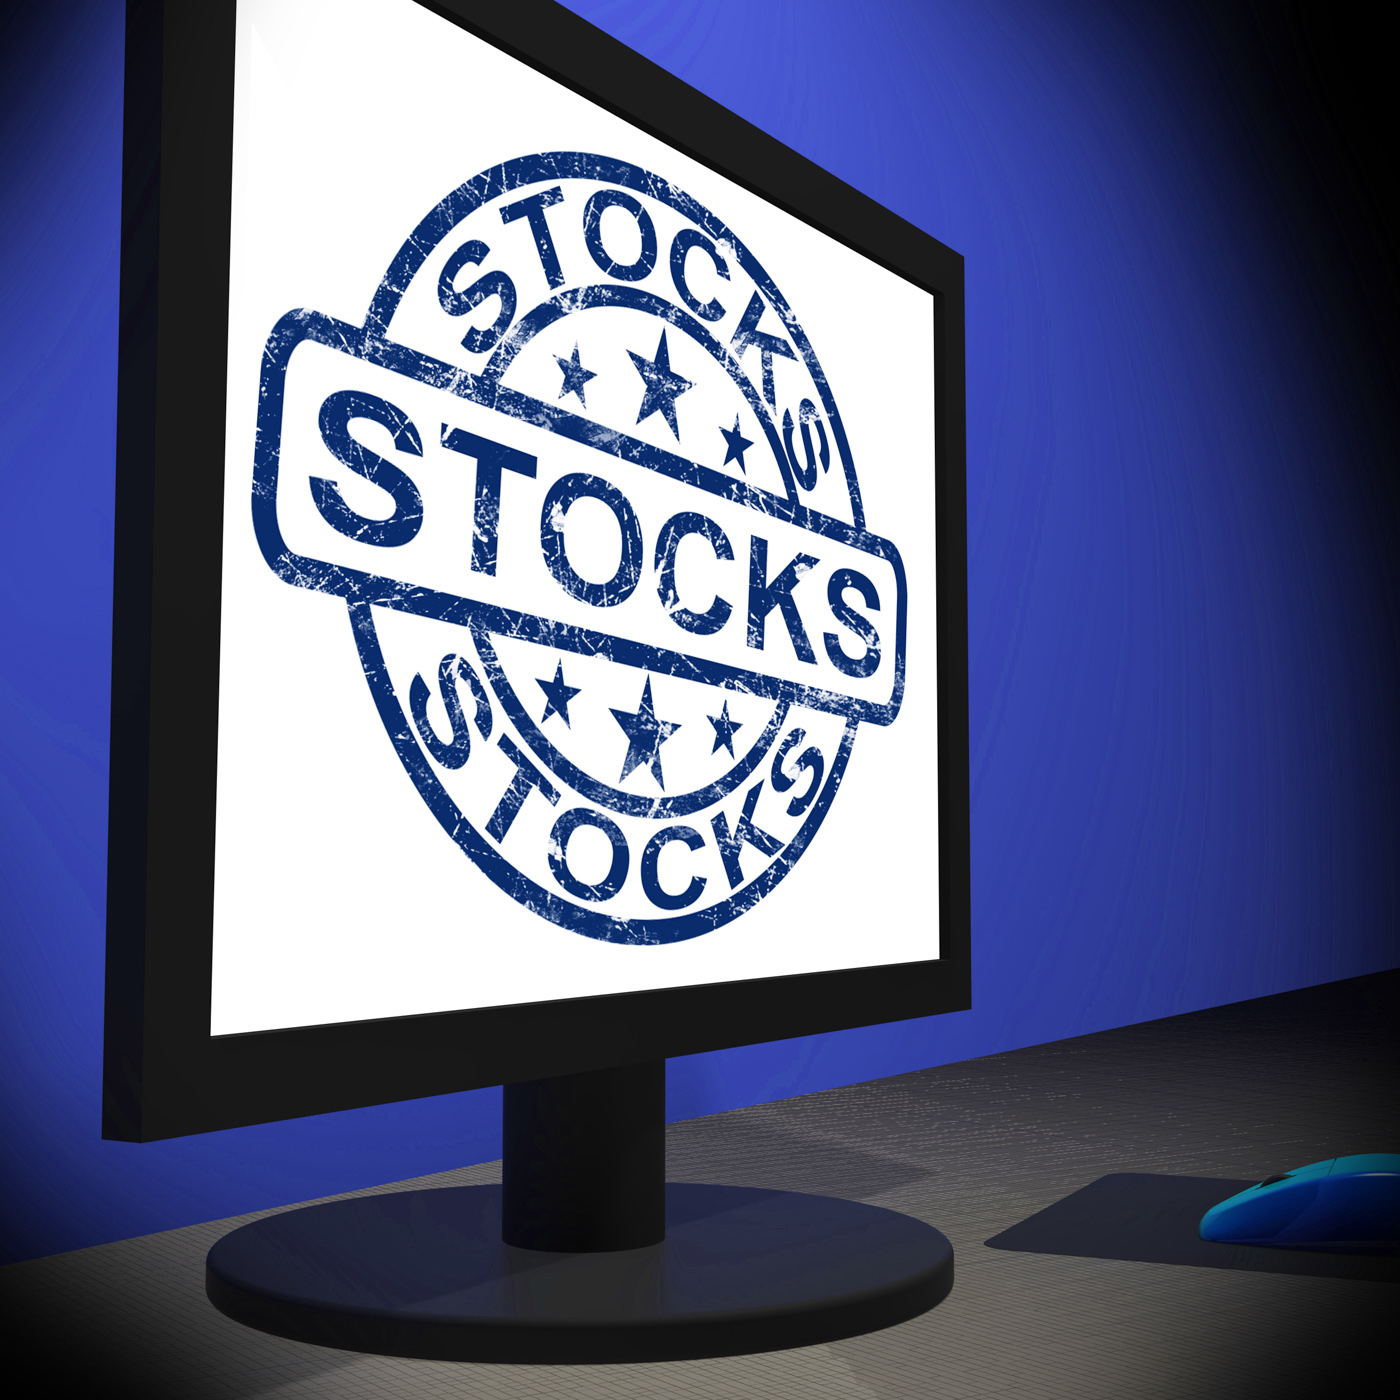 Stocks screen shows shares growth and stock market photo